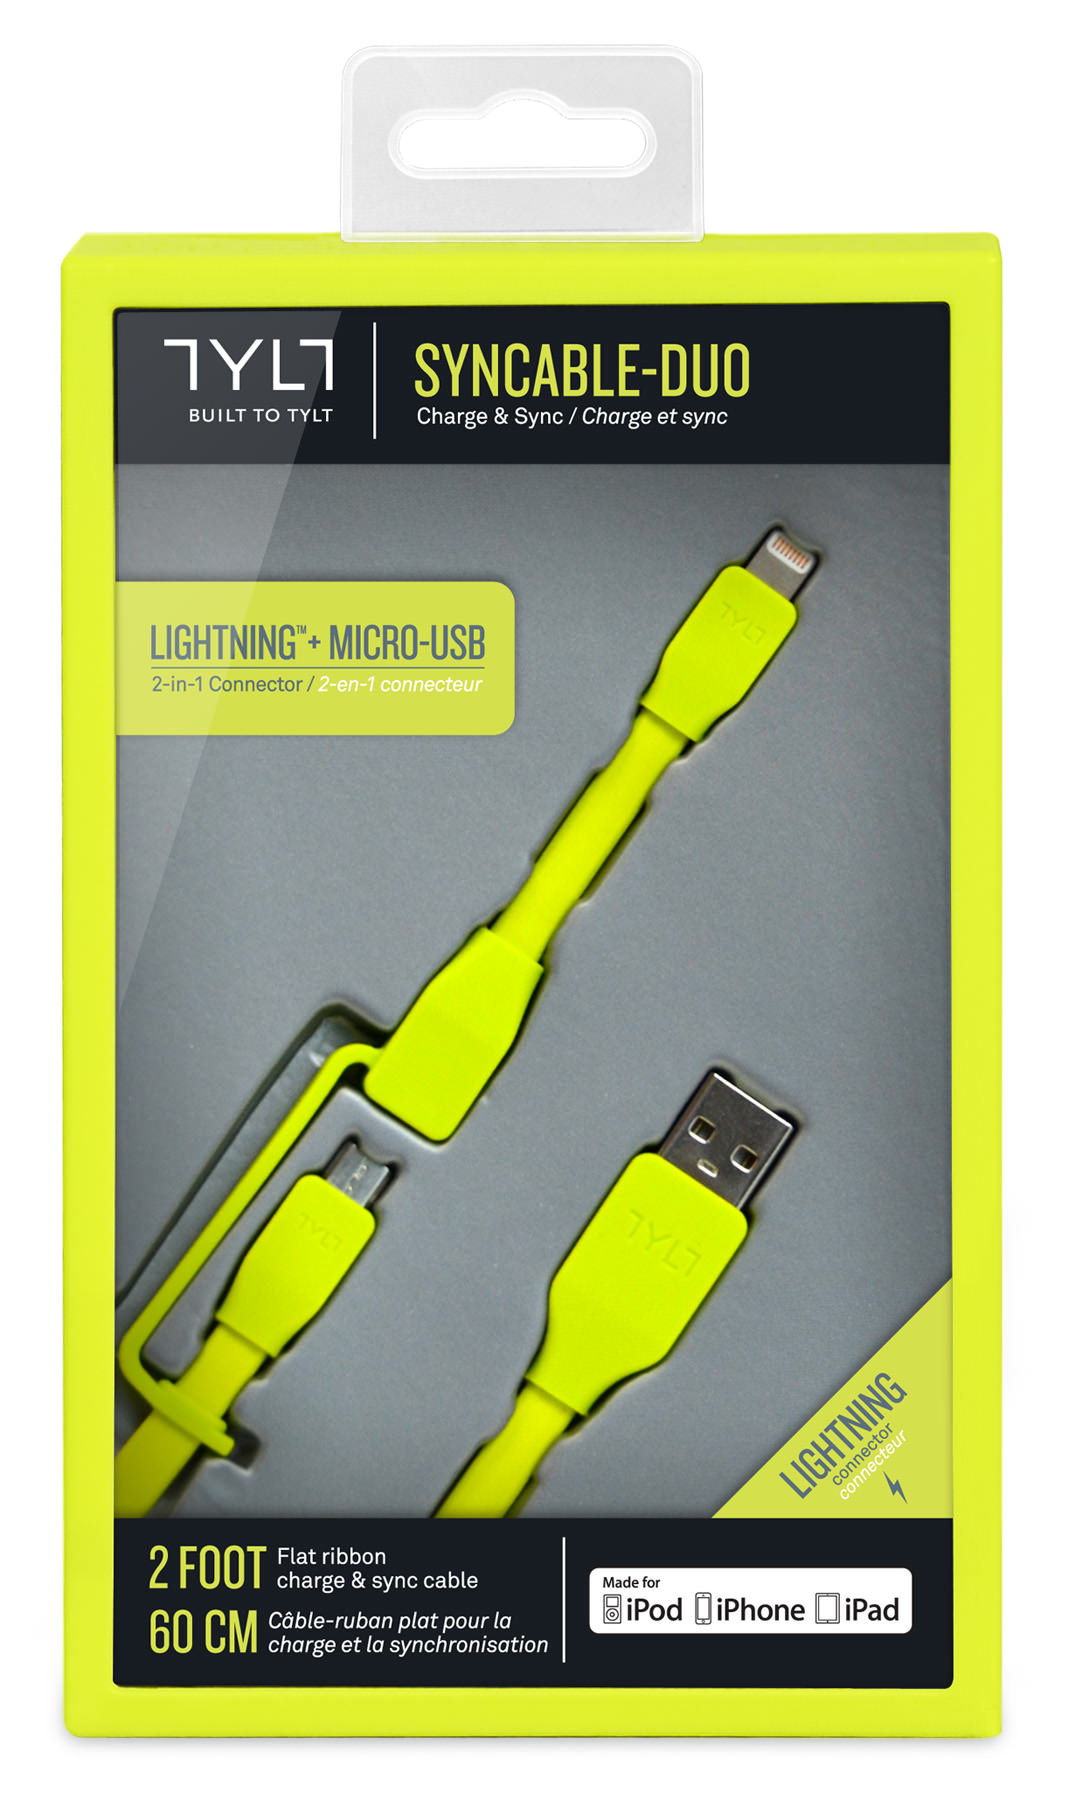 TYLT SYNCABLE DUO 04